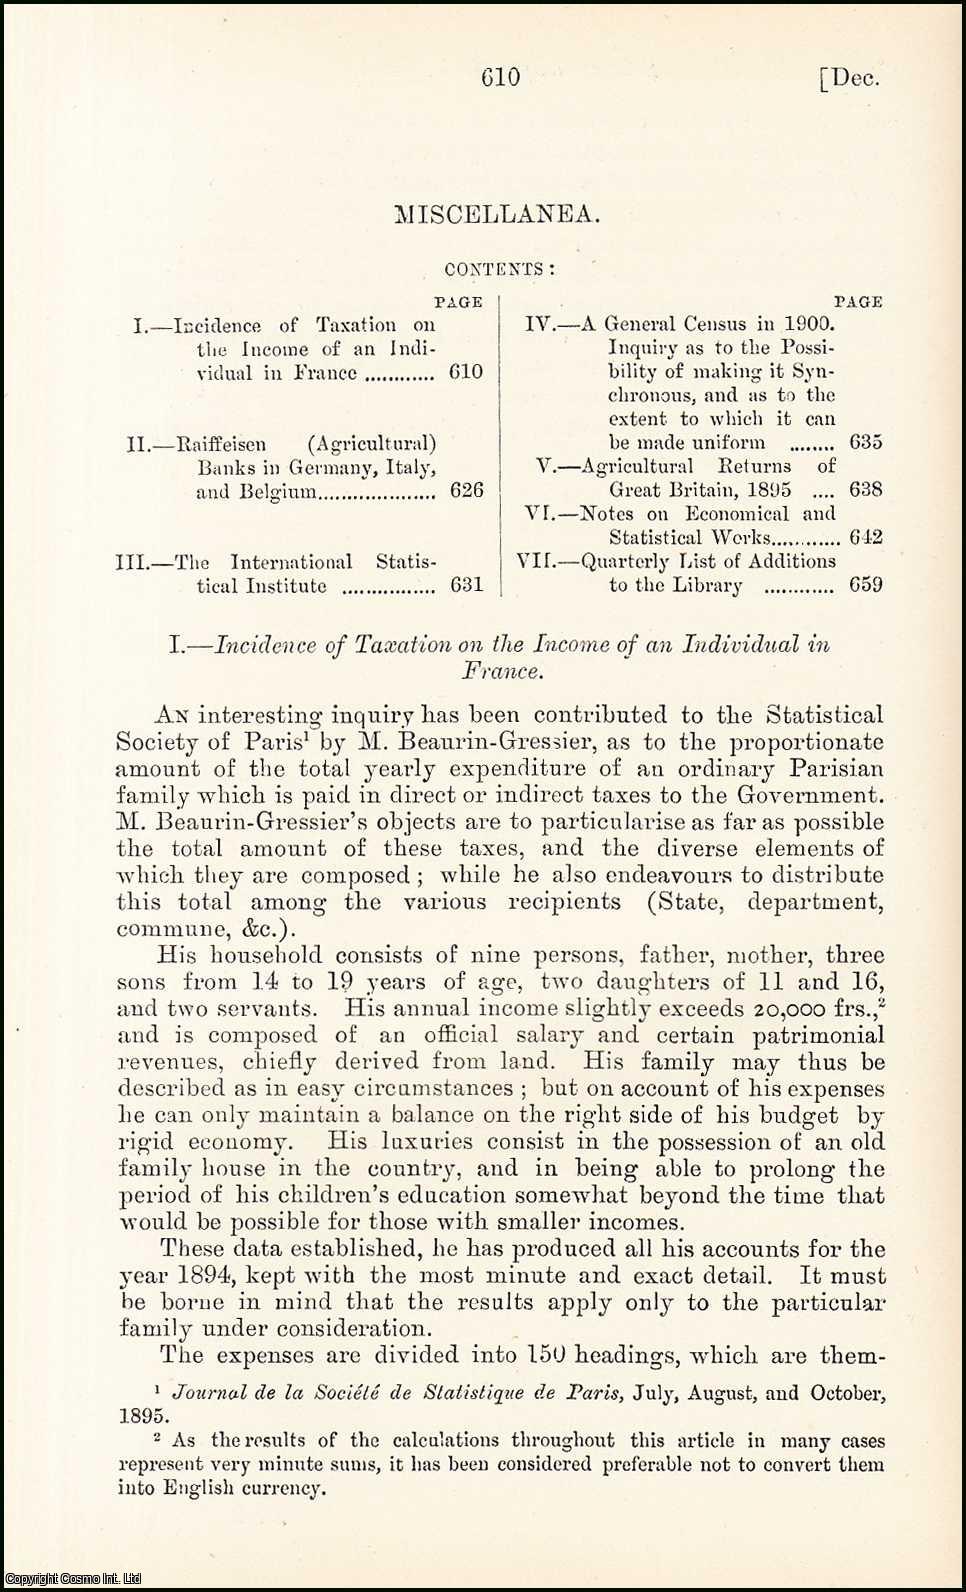 No Author Stated - Incidence of Taxation on the Income of an Individual in France. An uncommon original article from the Journal of the Royal Statistical Society of London, 1895.